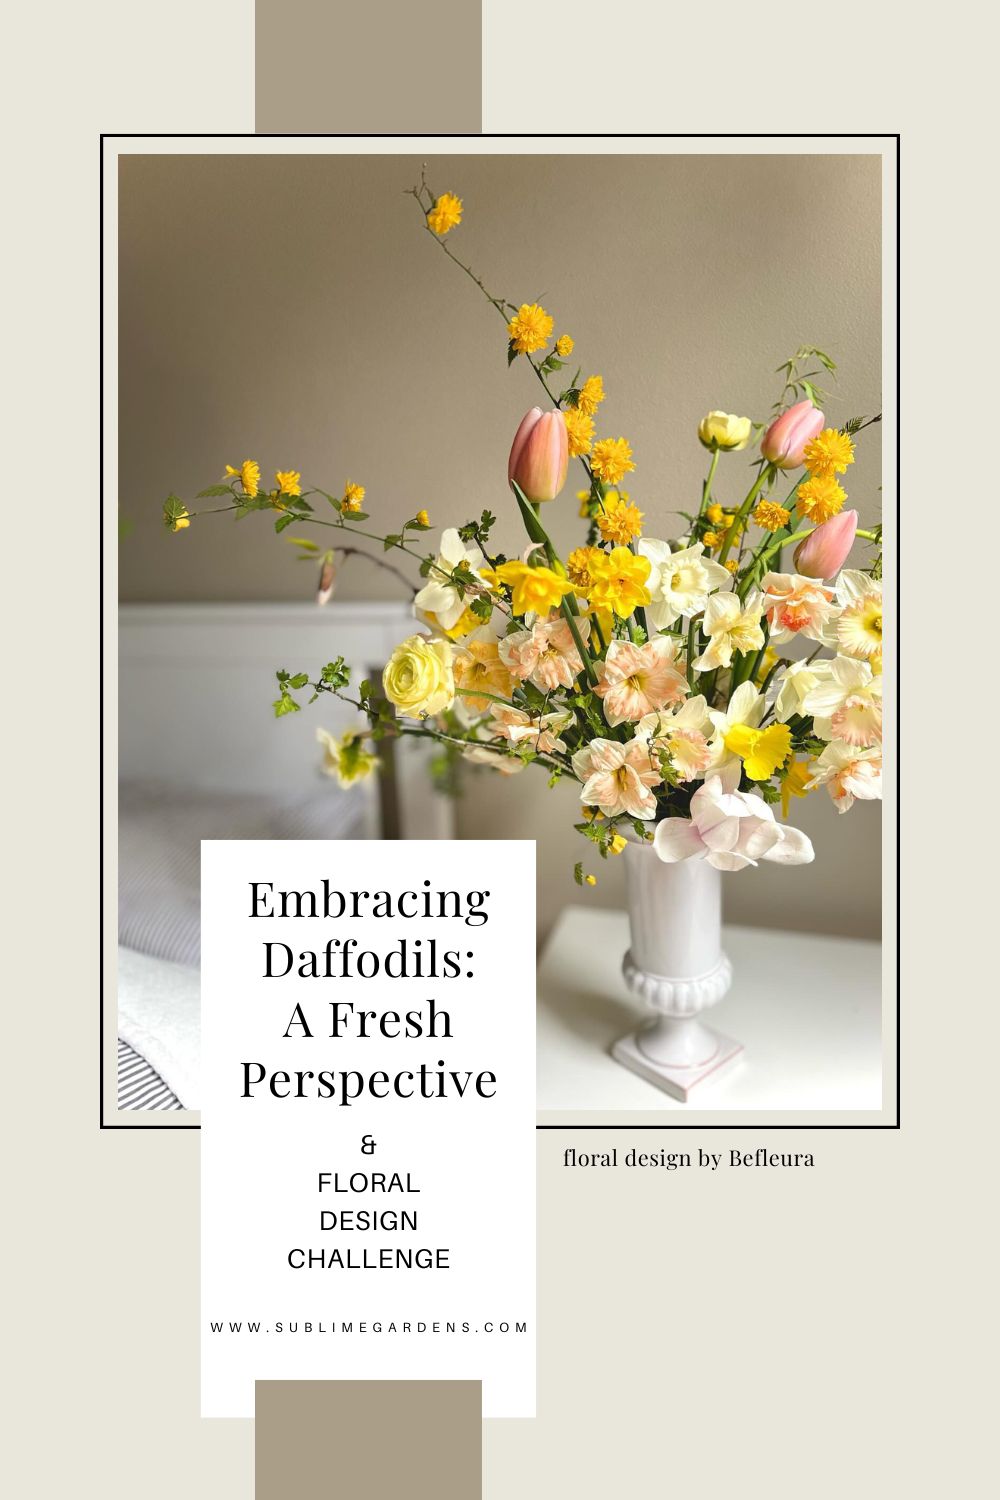 Embracing Daffodils: A Fresh Perspective & Floral Design Challenge